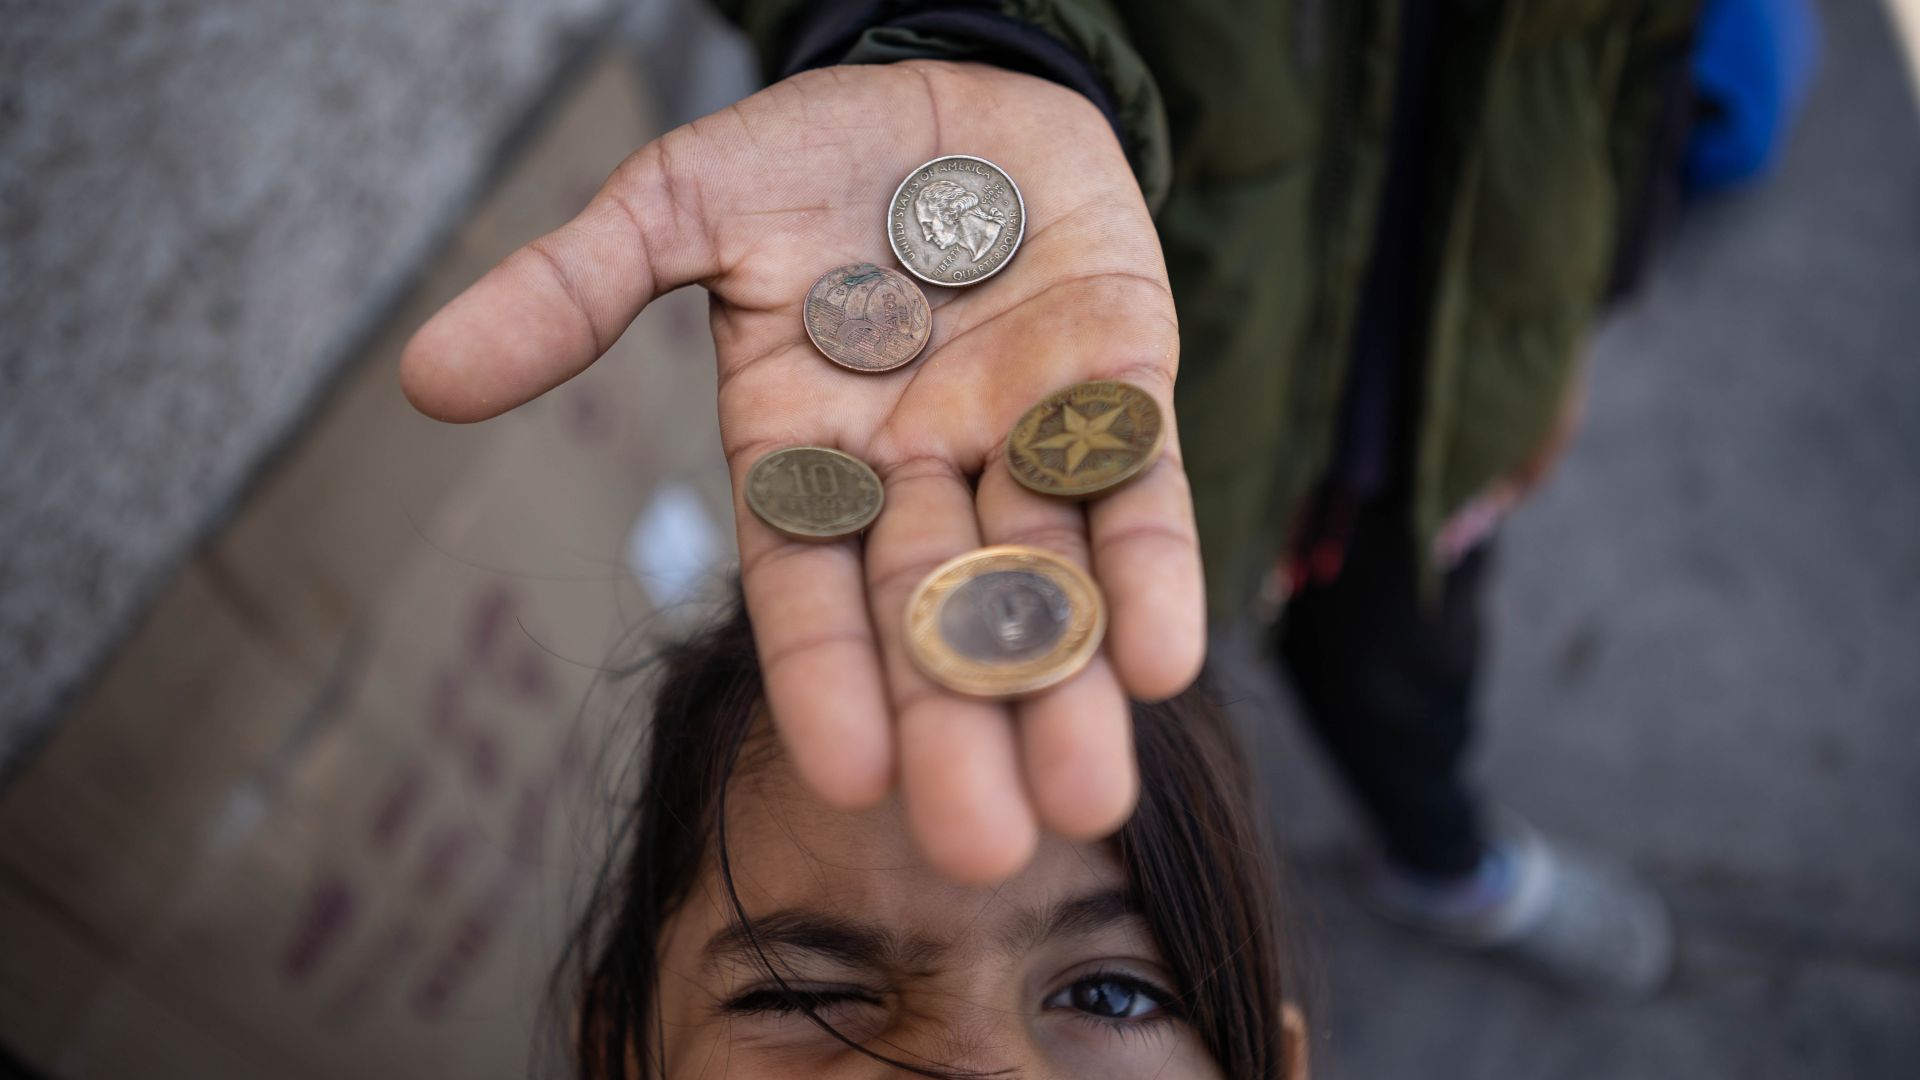 Five-year-old Allyson poses beneath an outstretched hand holding a few coins.